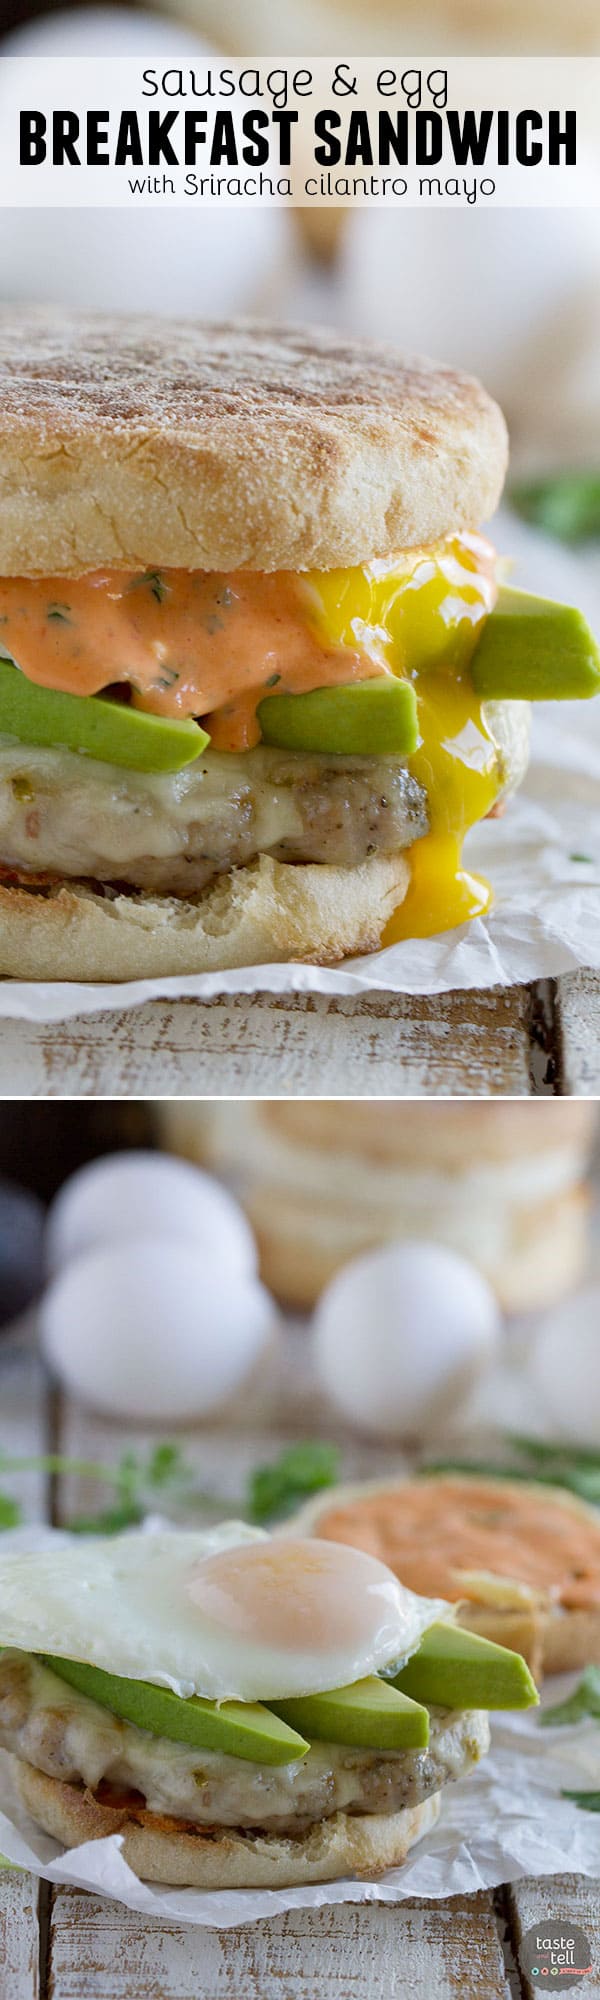 Perfect for breakfast, lunch or dinner, this Sausage and Egg Breakfast Sandwich Recipe has a homemade sausage patty and a perfectly cooked egg, and then is topped with an easy Sriracha Cilantro Mayonnaise.